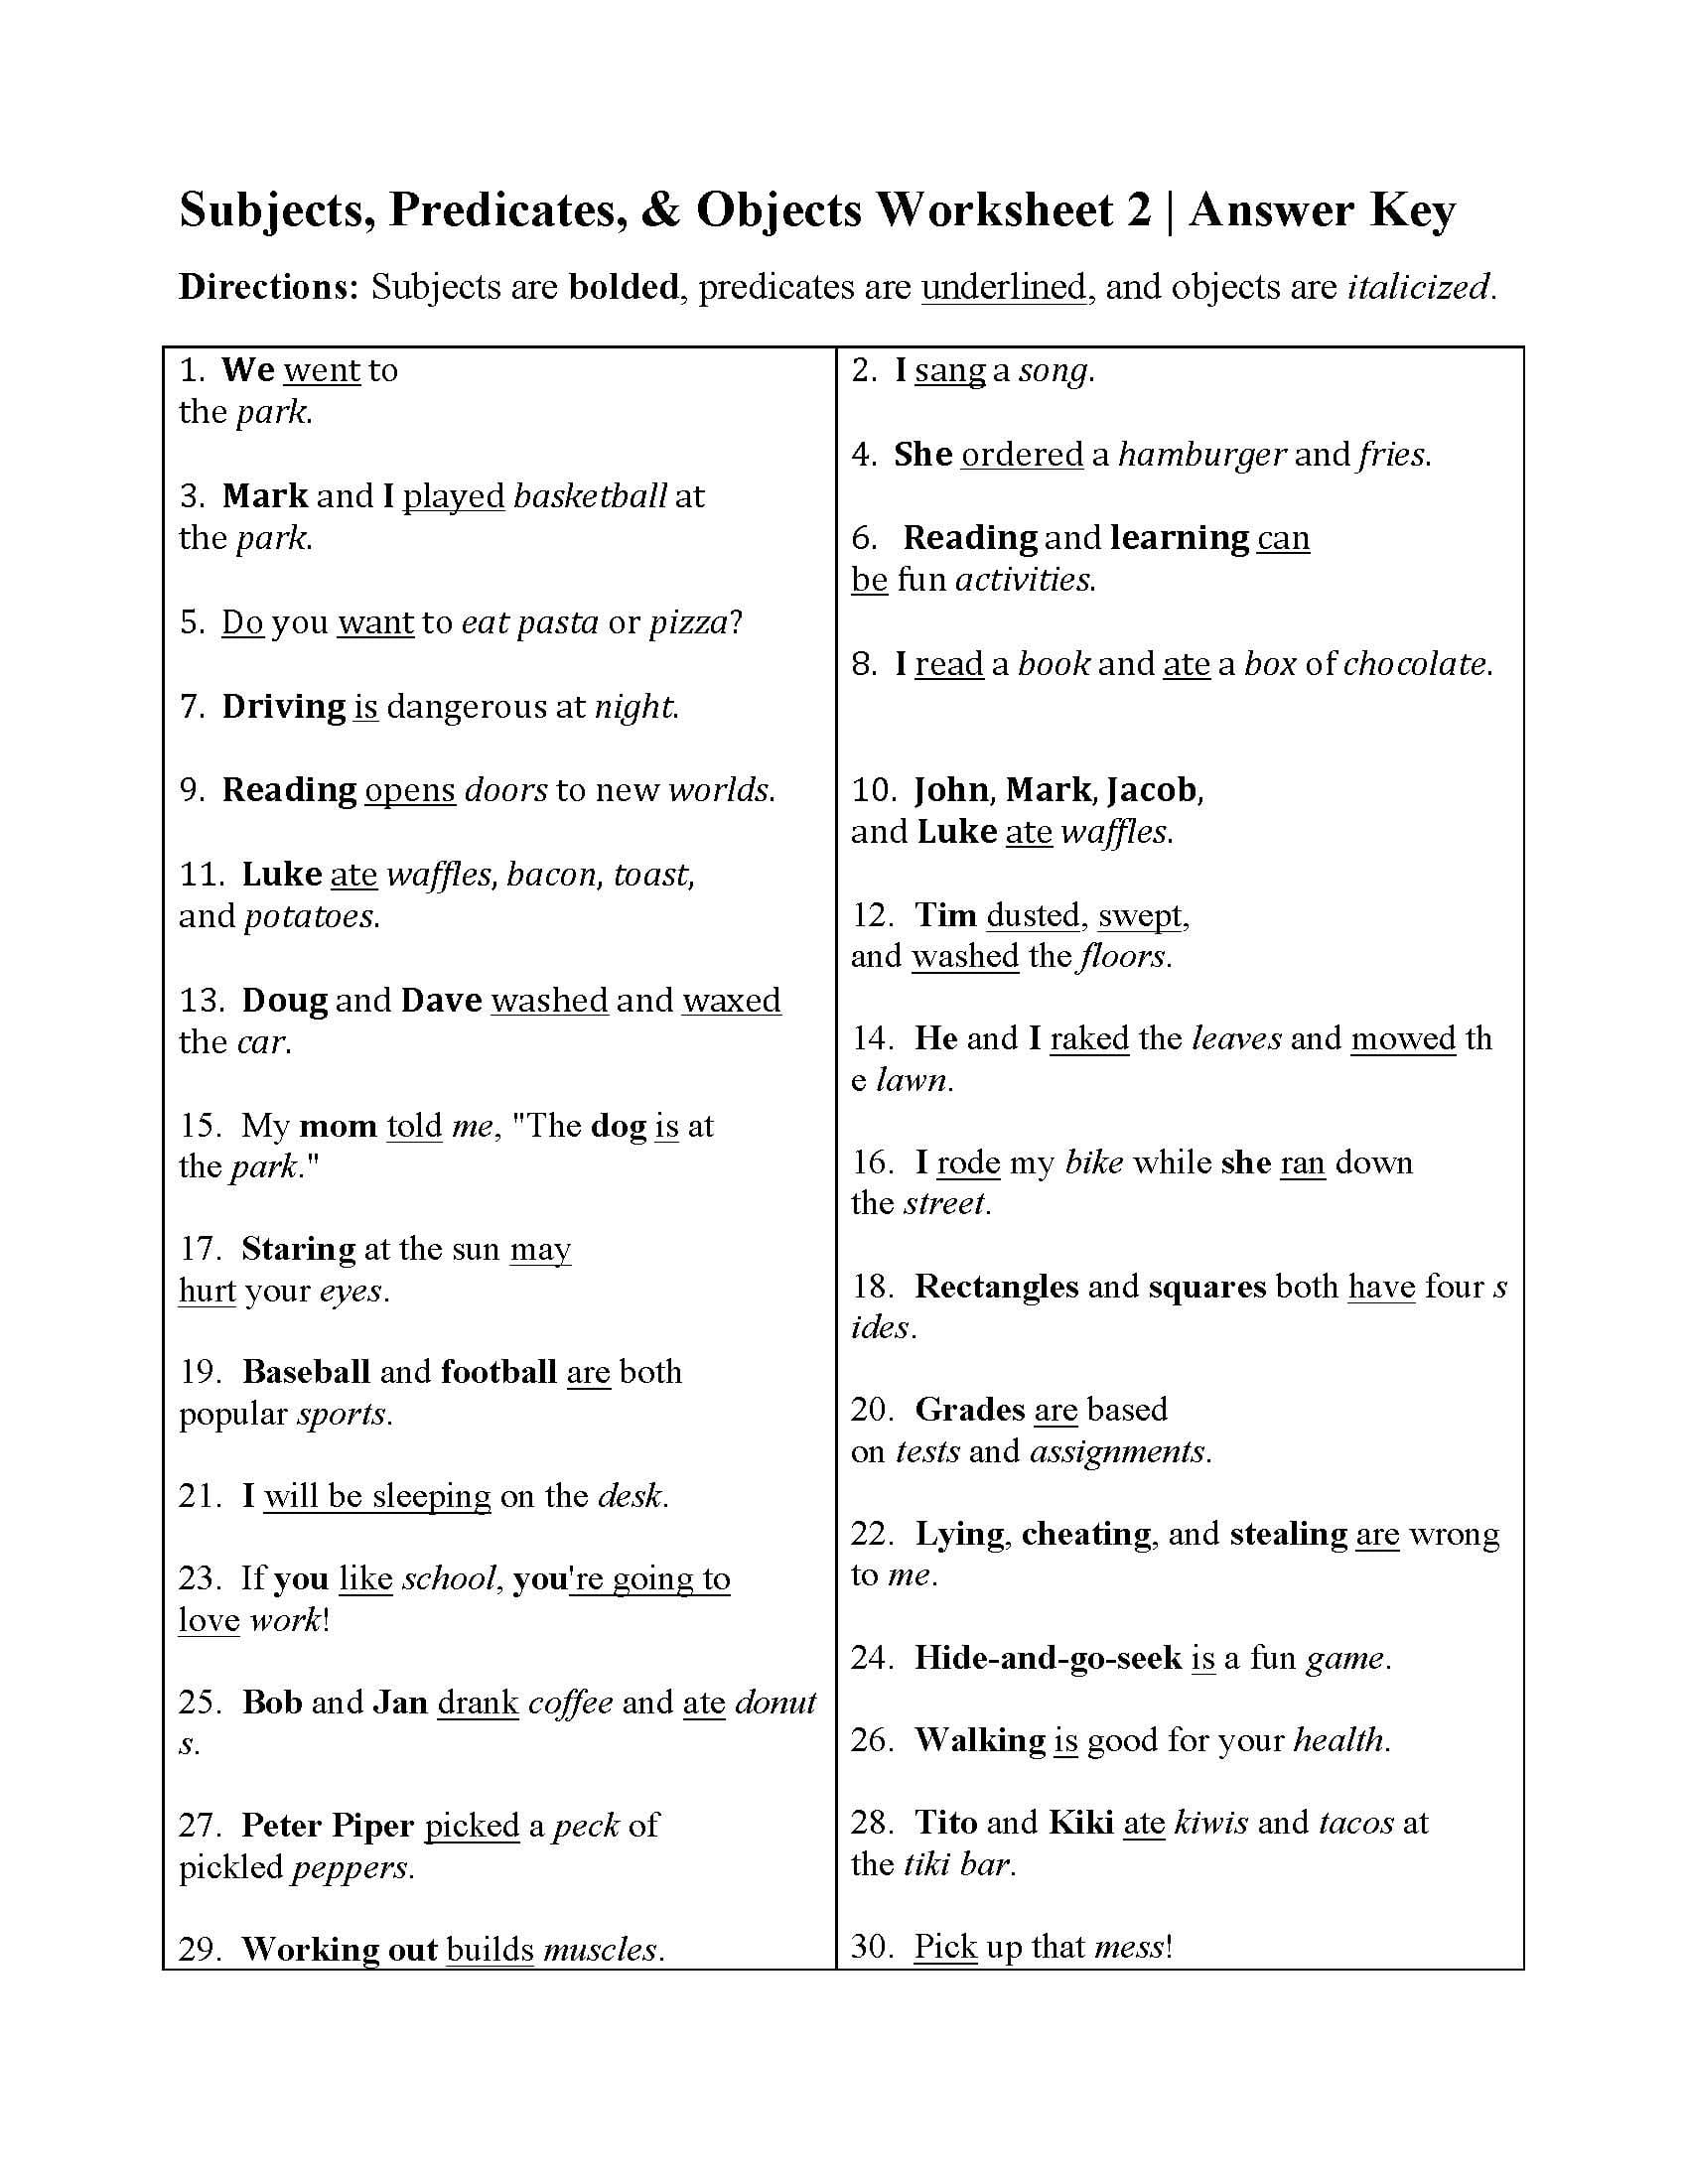 Subjects Predicates And Objects Worksheet 2  Answers For Subject And Predicate Worksheet